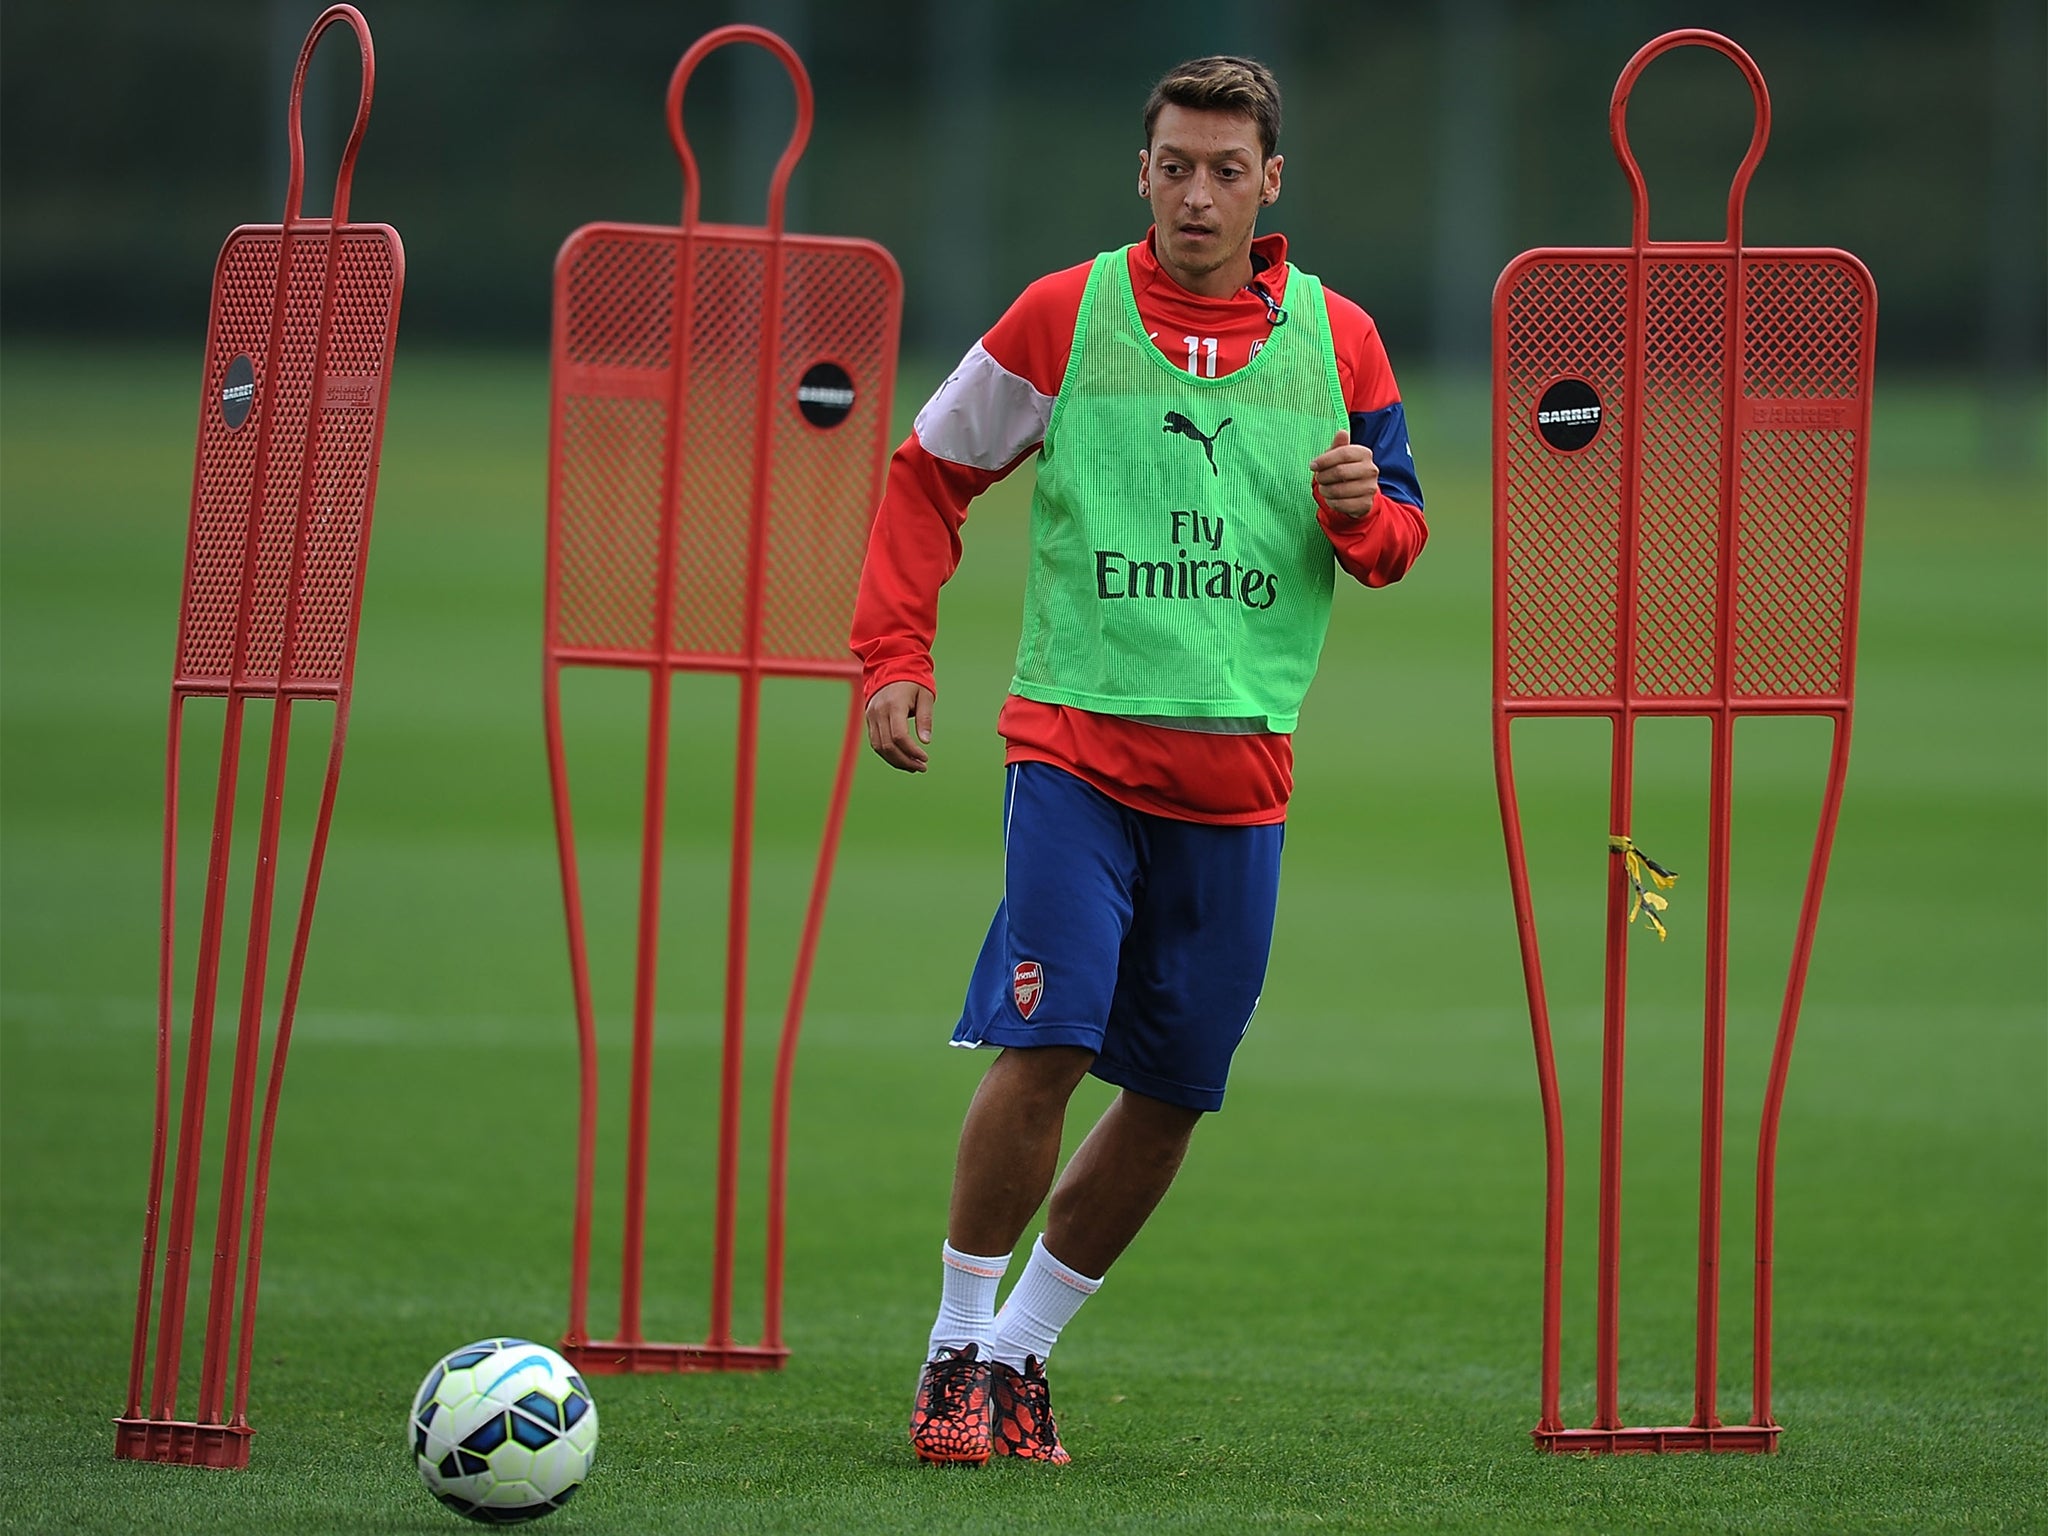 Mesut Özil trains this week ahead of a possible return to Arsenal’s squad to face Everton